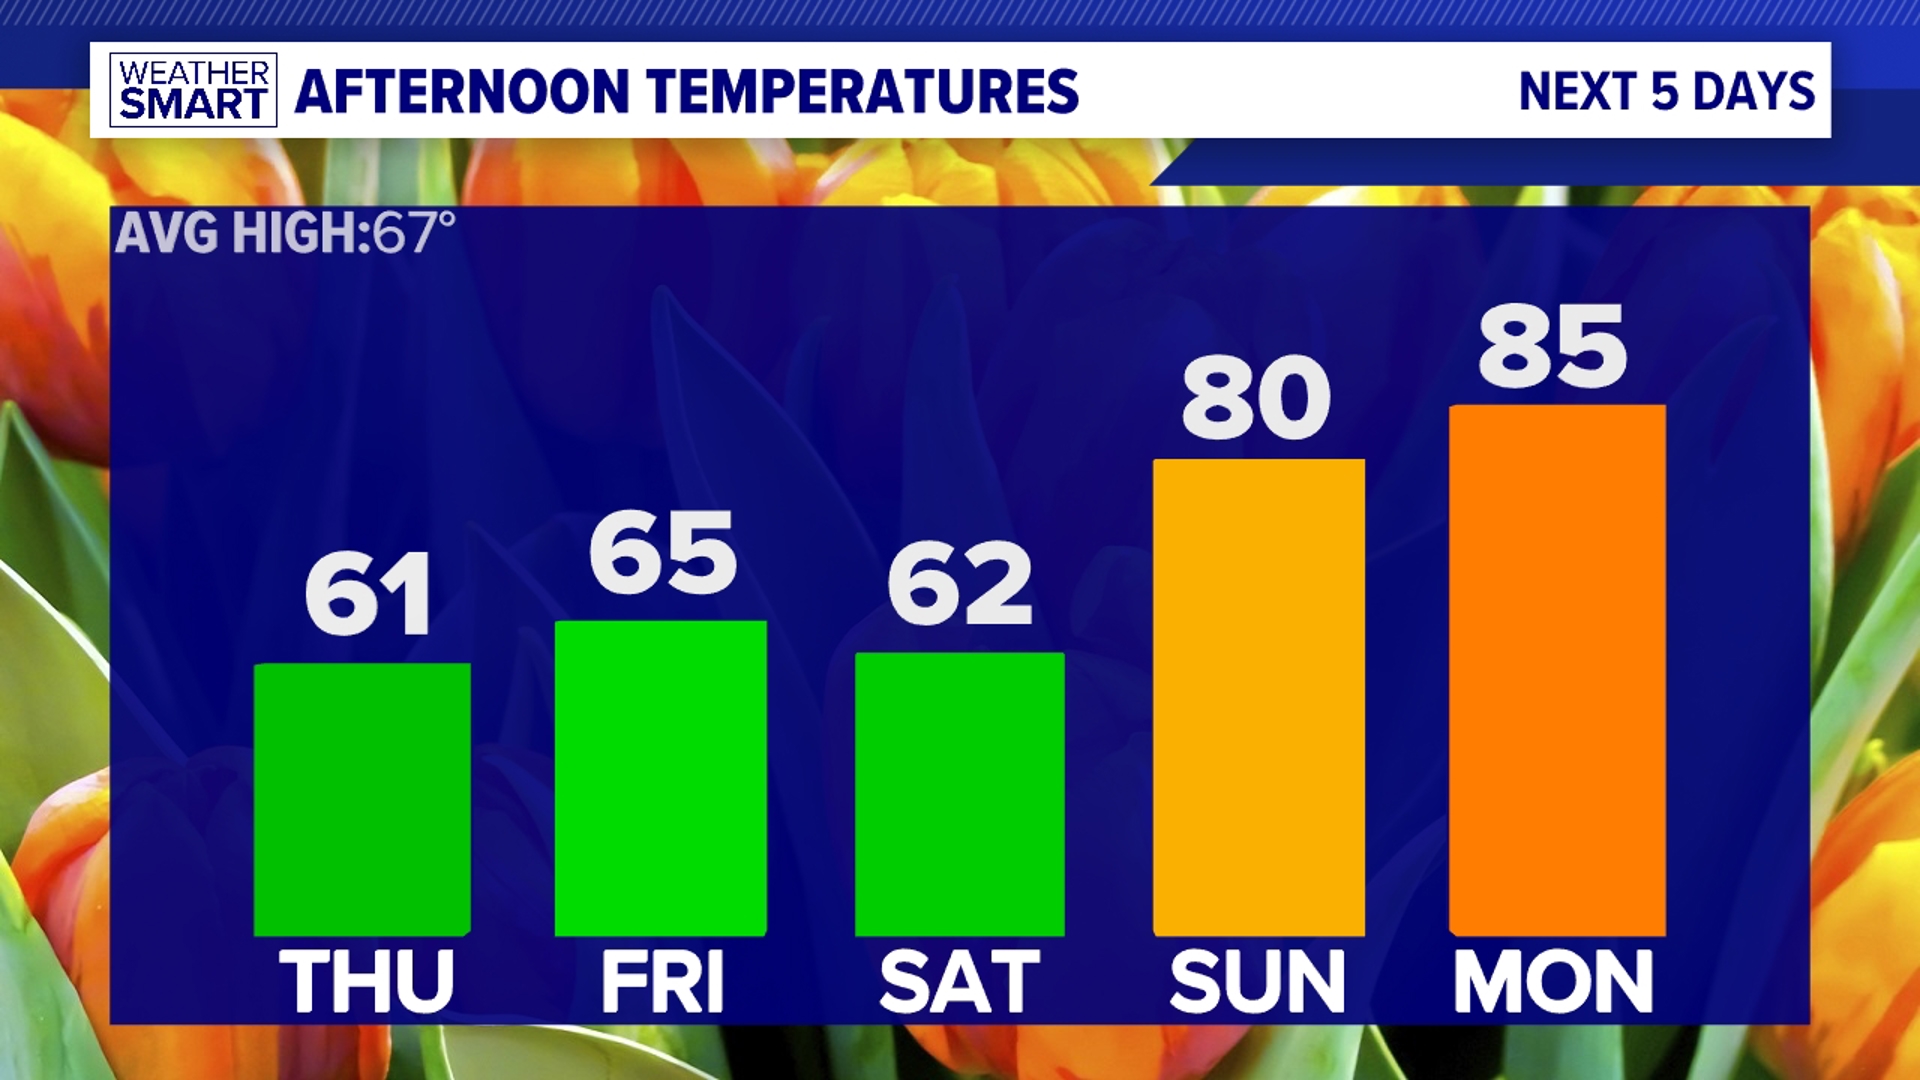 It's a brief cooldown at the end of the week. Then, we flip the switch to summer by Sunday, and it lasts into next week!